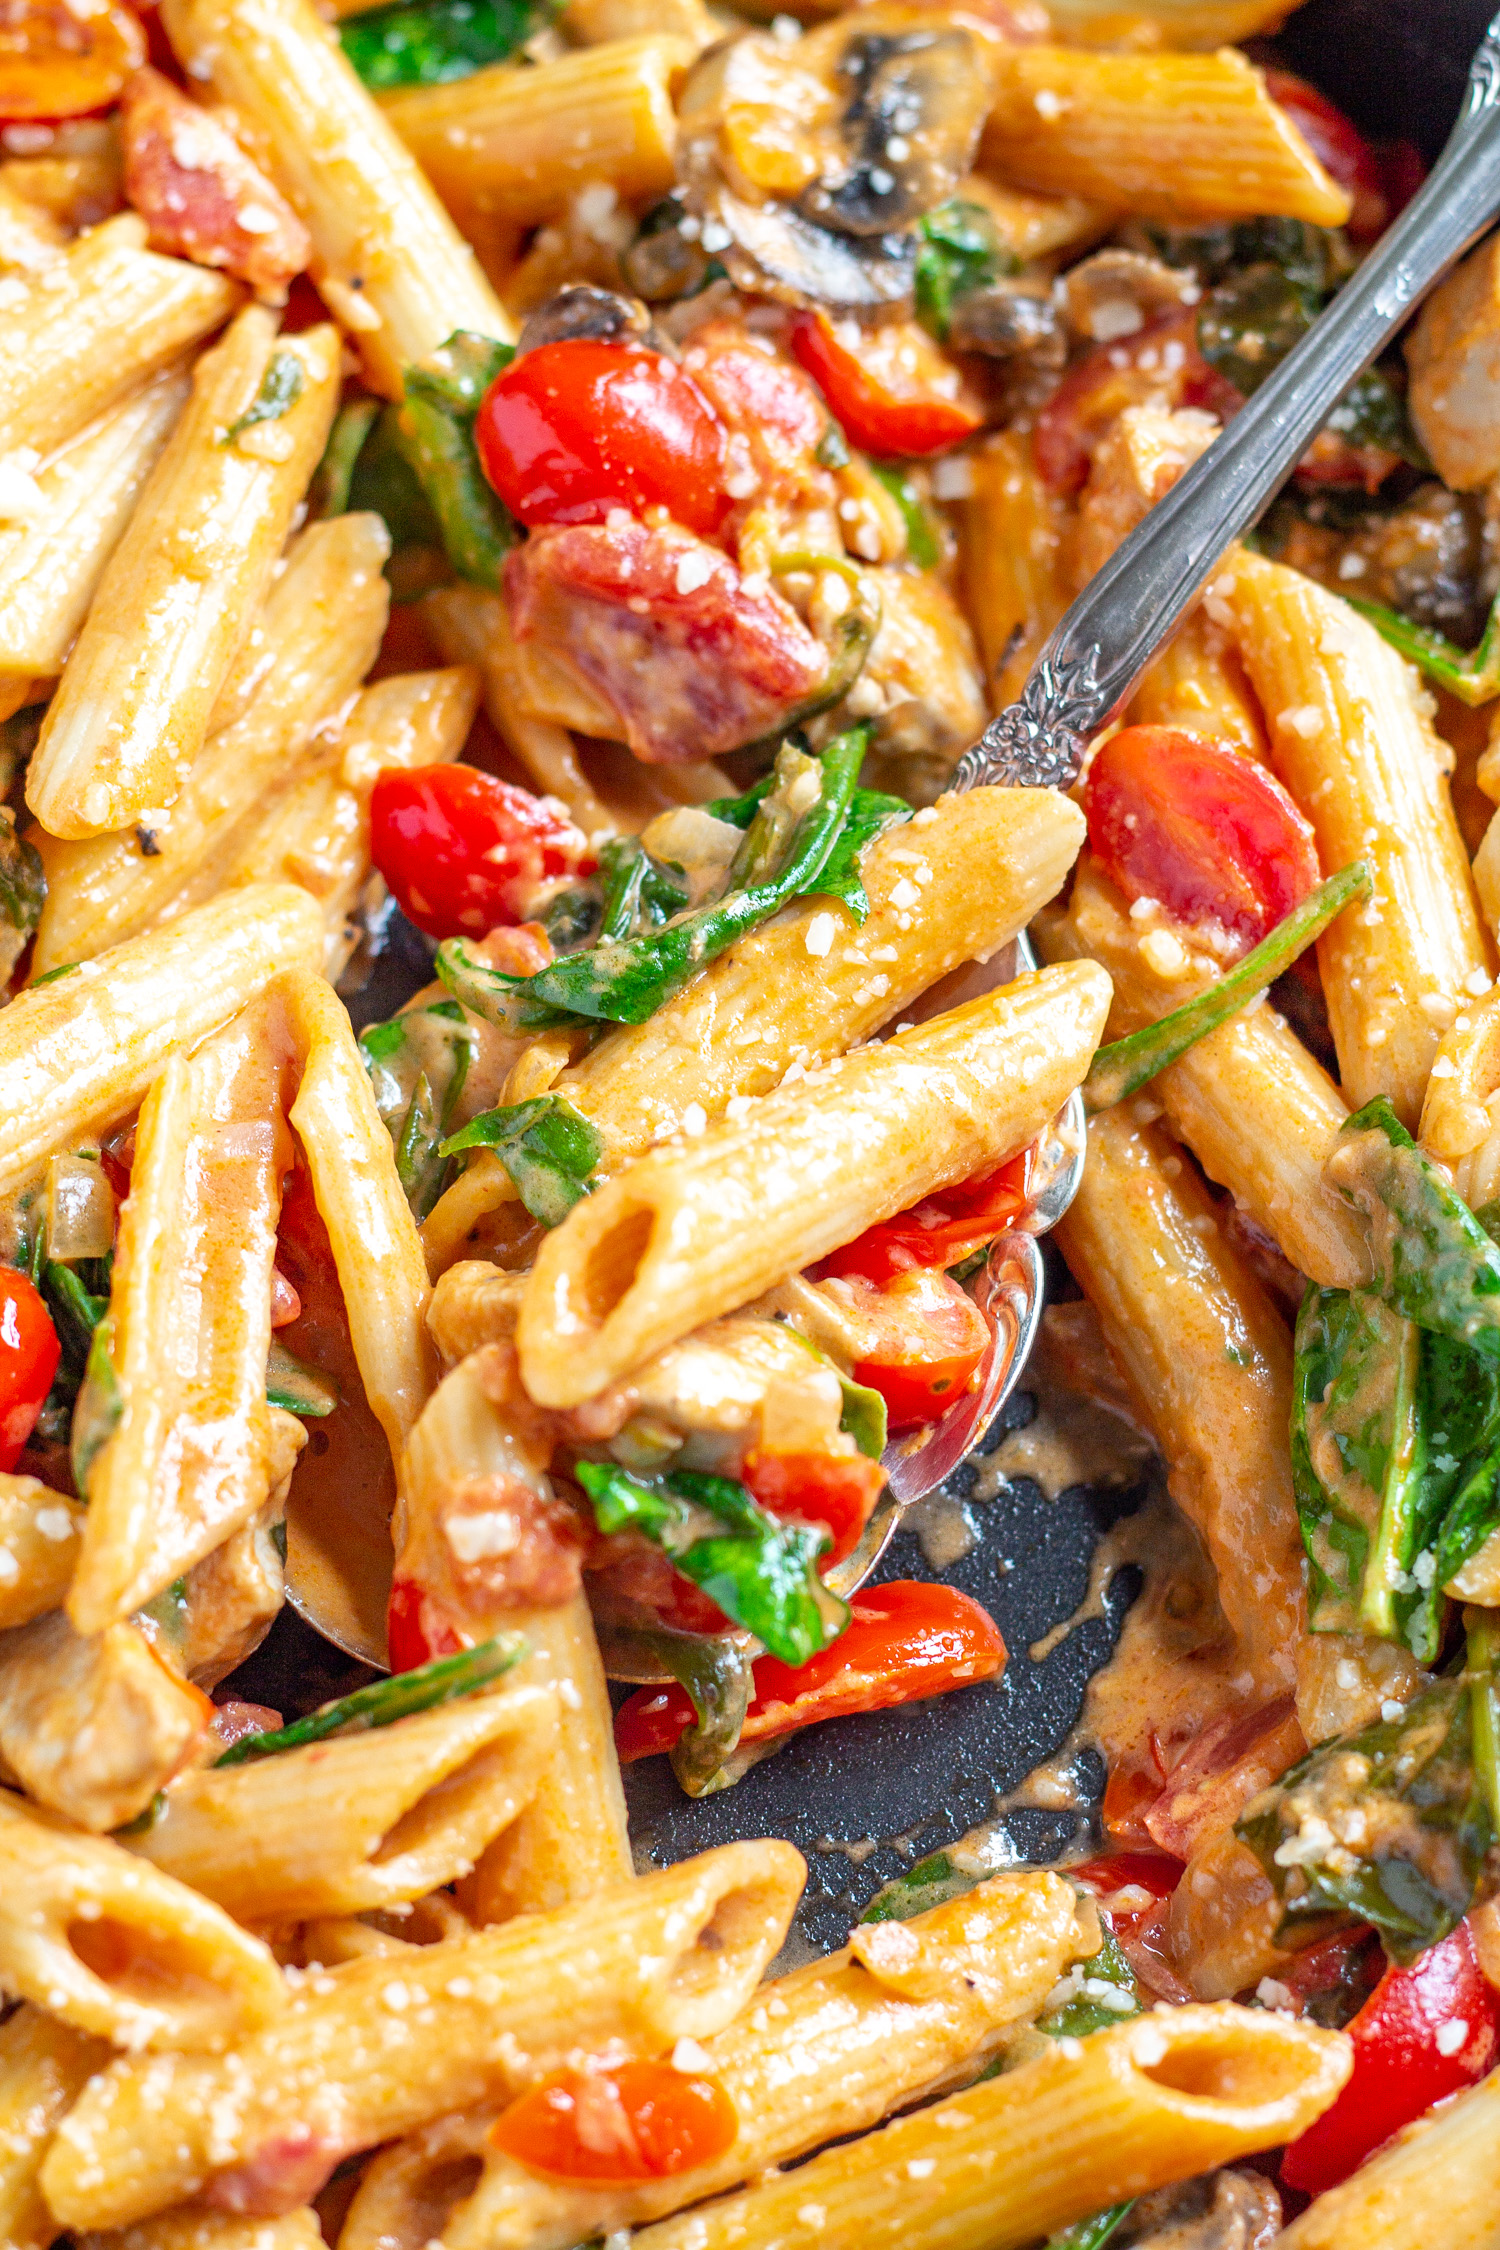 Creamy Tomato Penne with Chicken and Veggies | A Weeknight Dinner